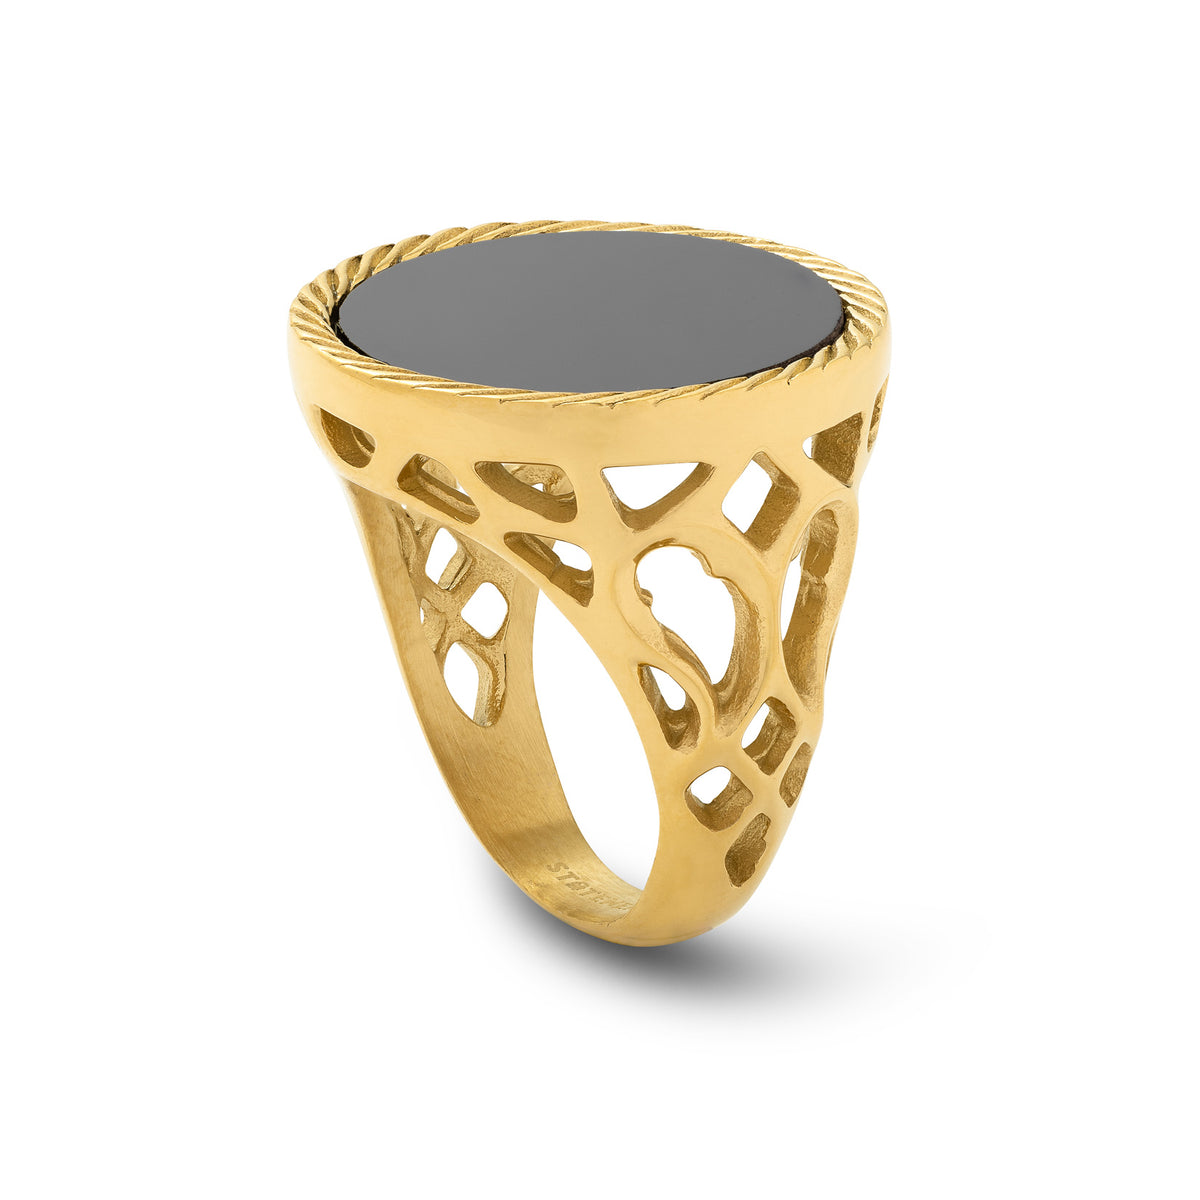 Onyx signet ring in gold on white background